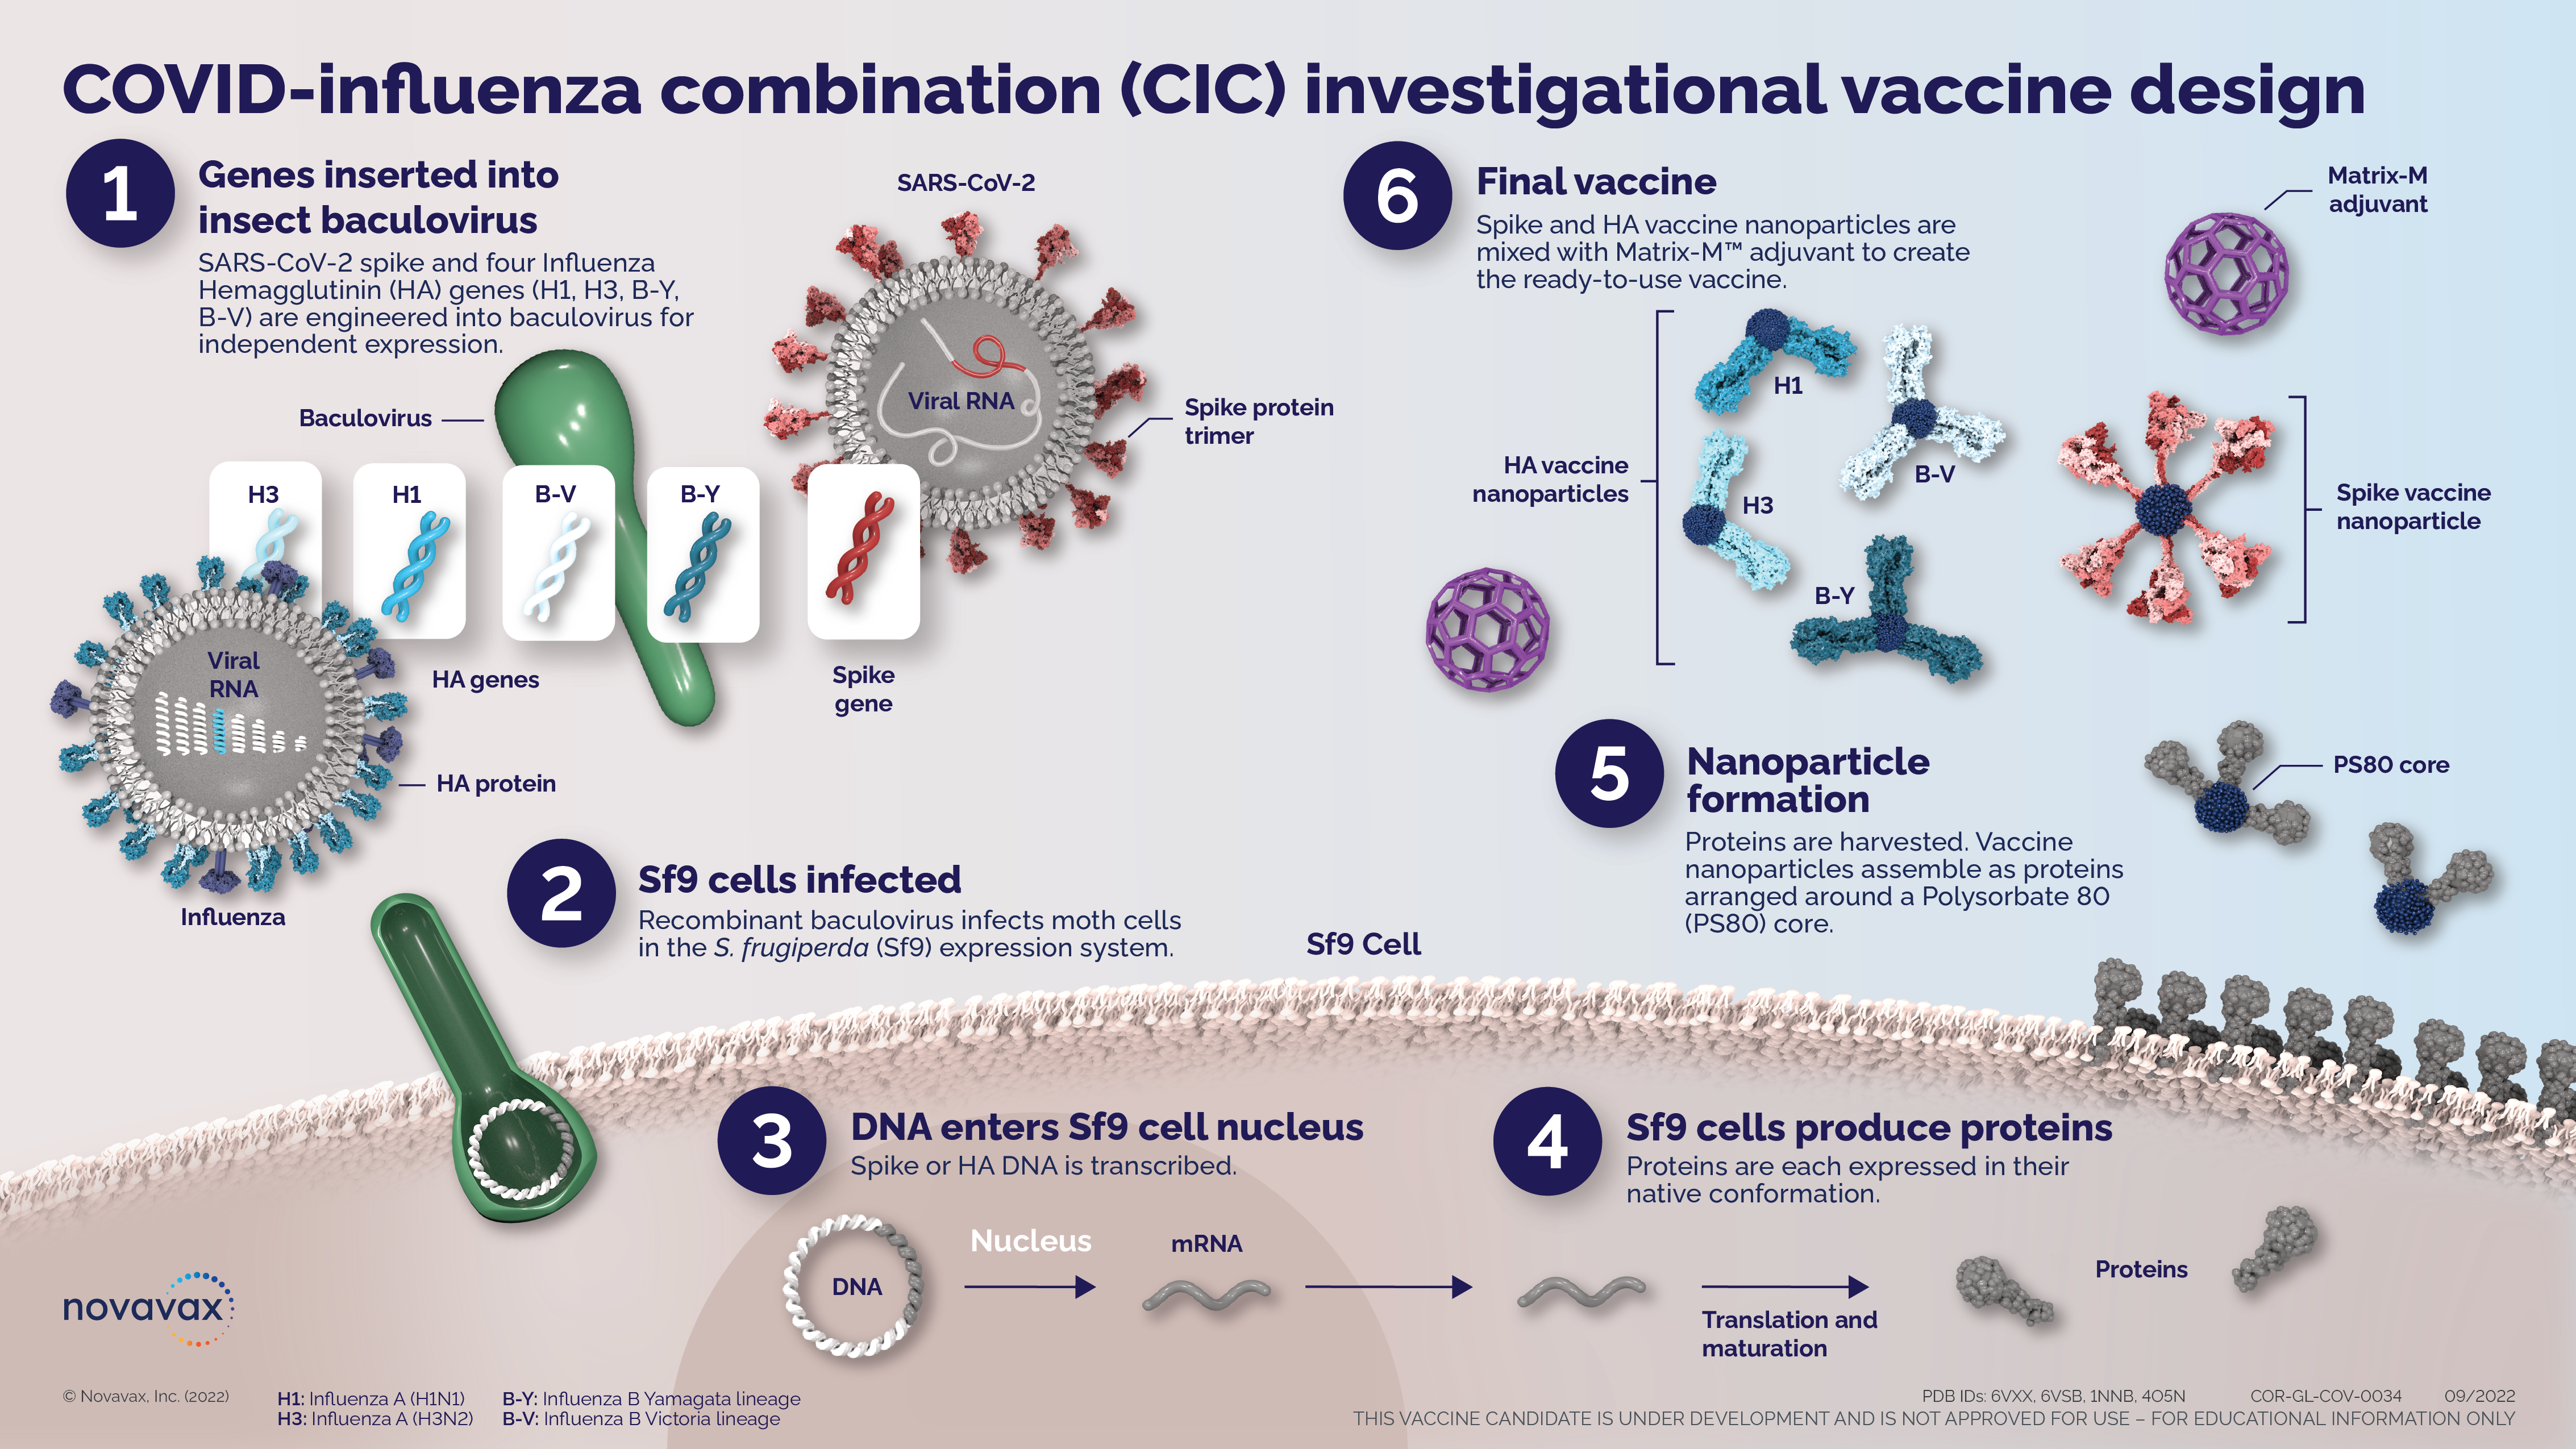 Infographic displaying the COVID-Influenza combination (CIC) investigational vaccine